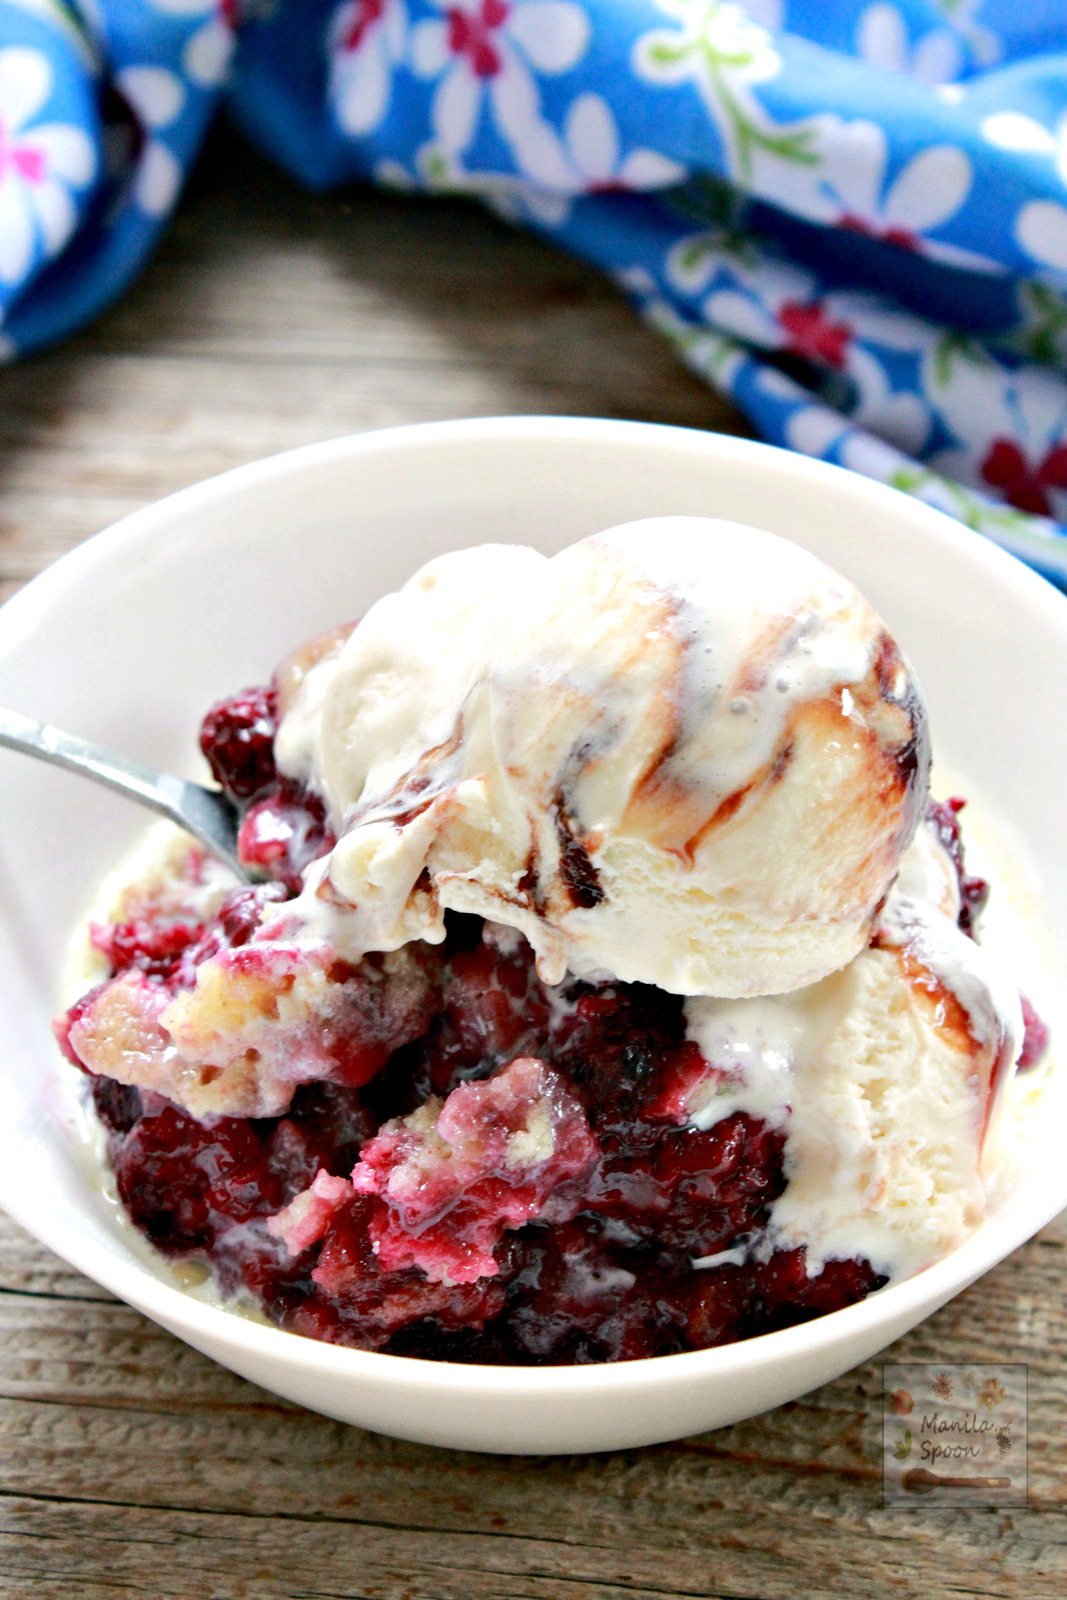 This is so incredibly delicious and incredibly easy to make! Best of all, no baking is necessary, as your slow cooker does all the work. Serve hot with cream or ice cream - heavenly! Slow cooker blackberry shoemaker